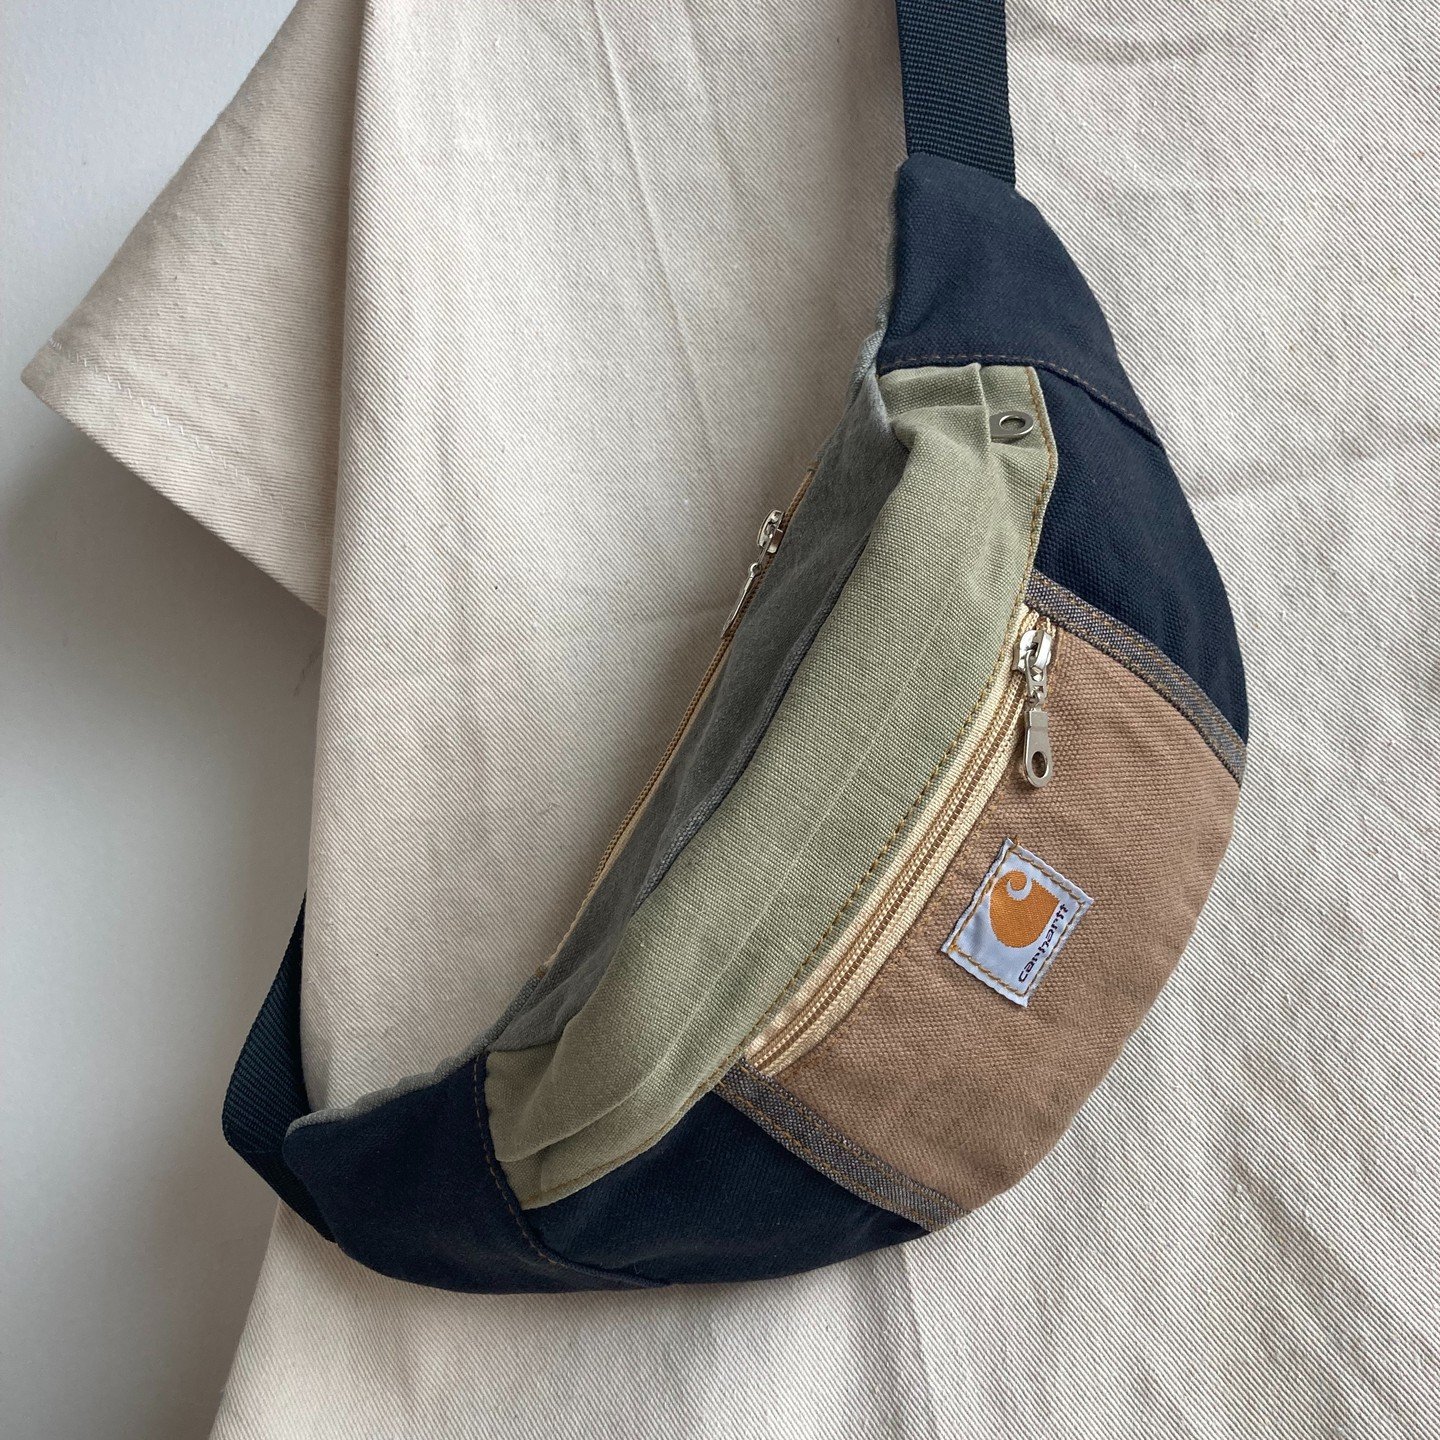 #Upcycled repurposed #Carhartt waist pack. Made from vintage Carhartt pants. Just dropped in shops. Each one unique. DM if out of town and would like to order.